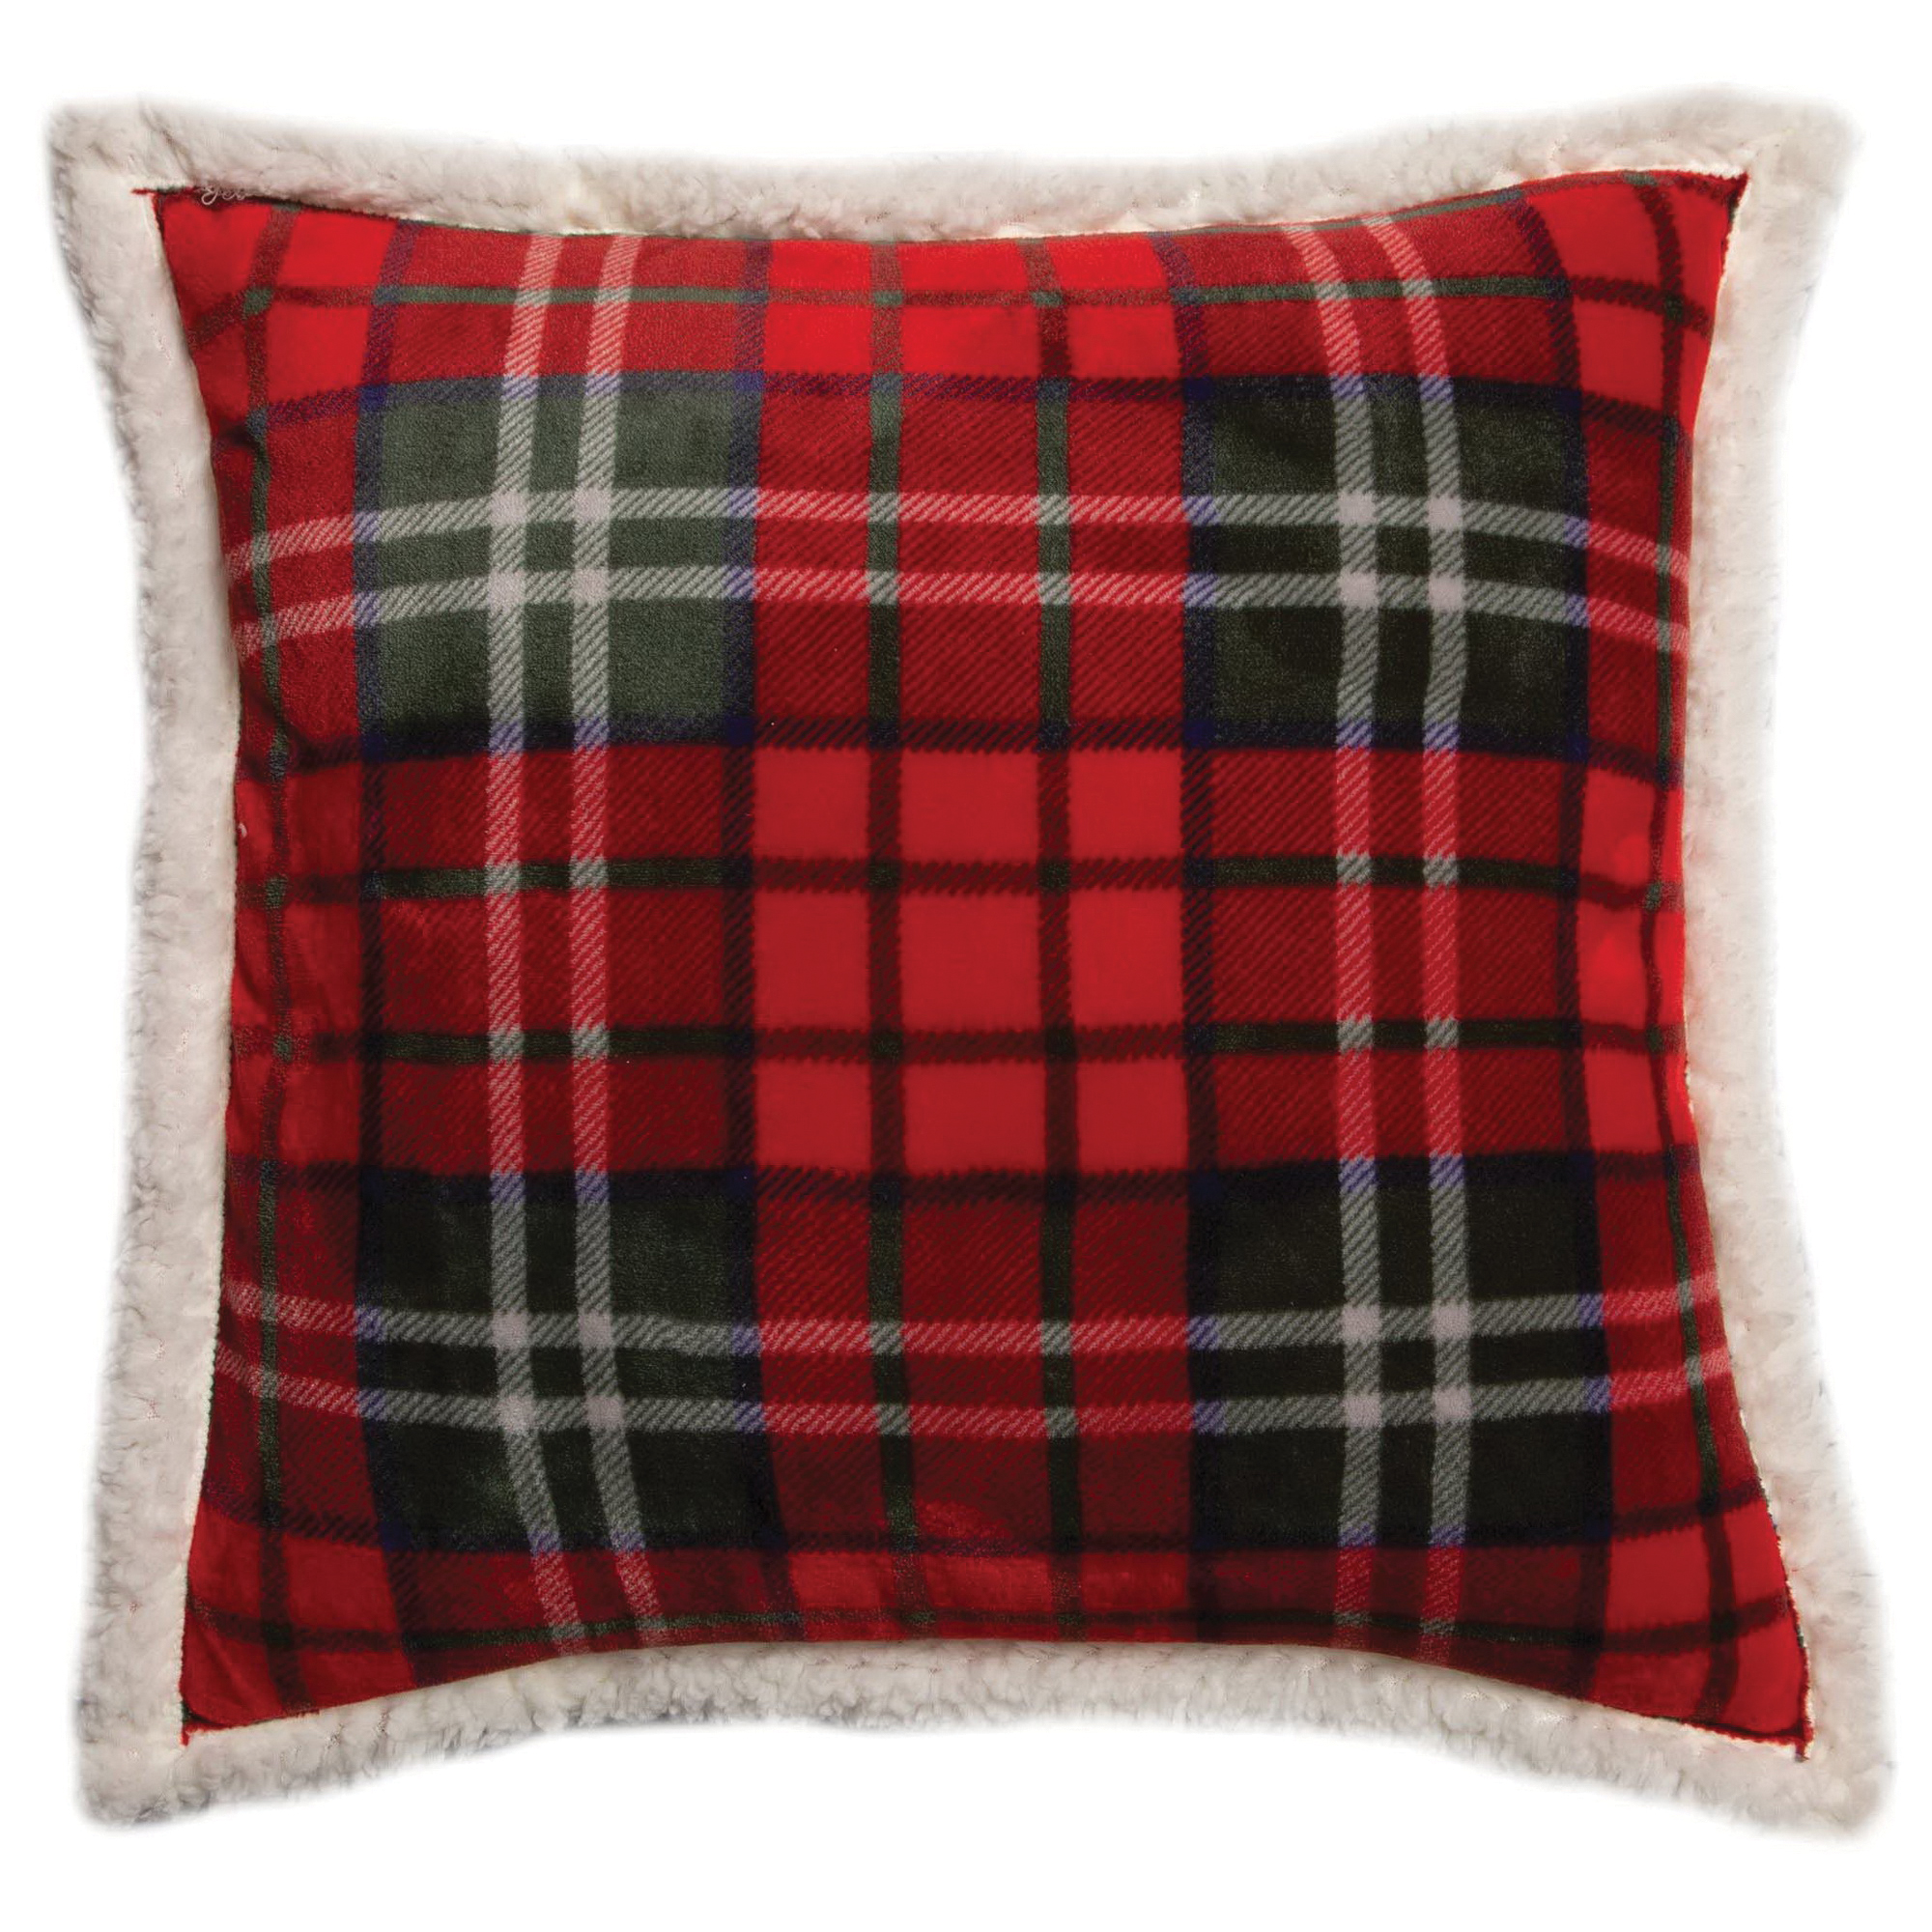 Carstens JP822 Throw Pillow, 18 in L, 18 in W, Holiday Plaid Pattern, Sherpa Fleece - 1